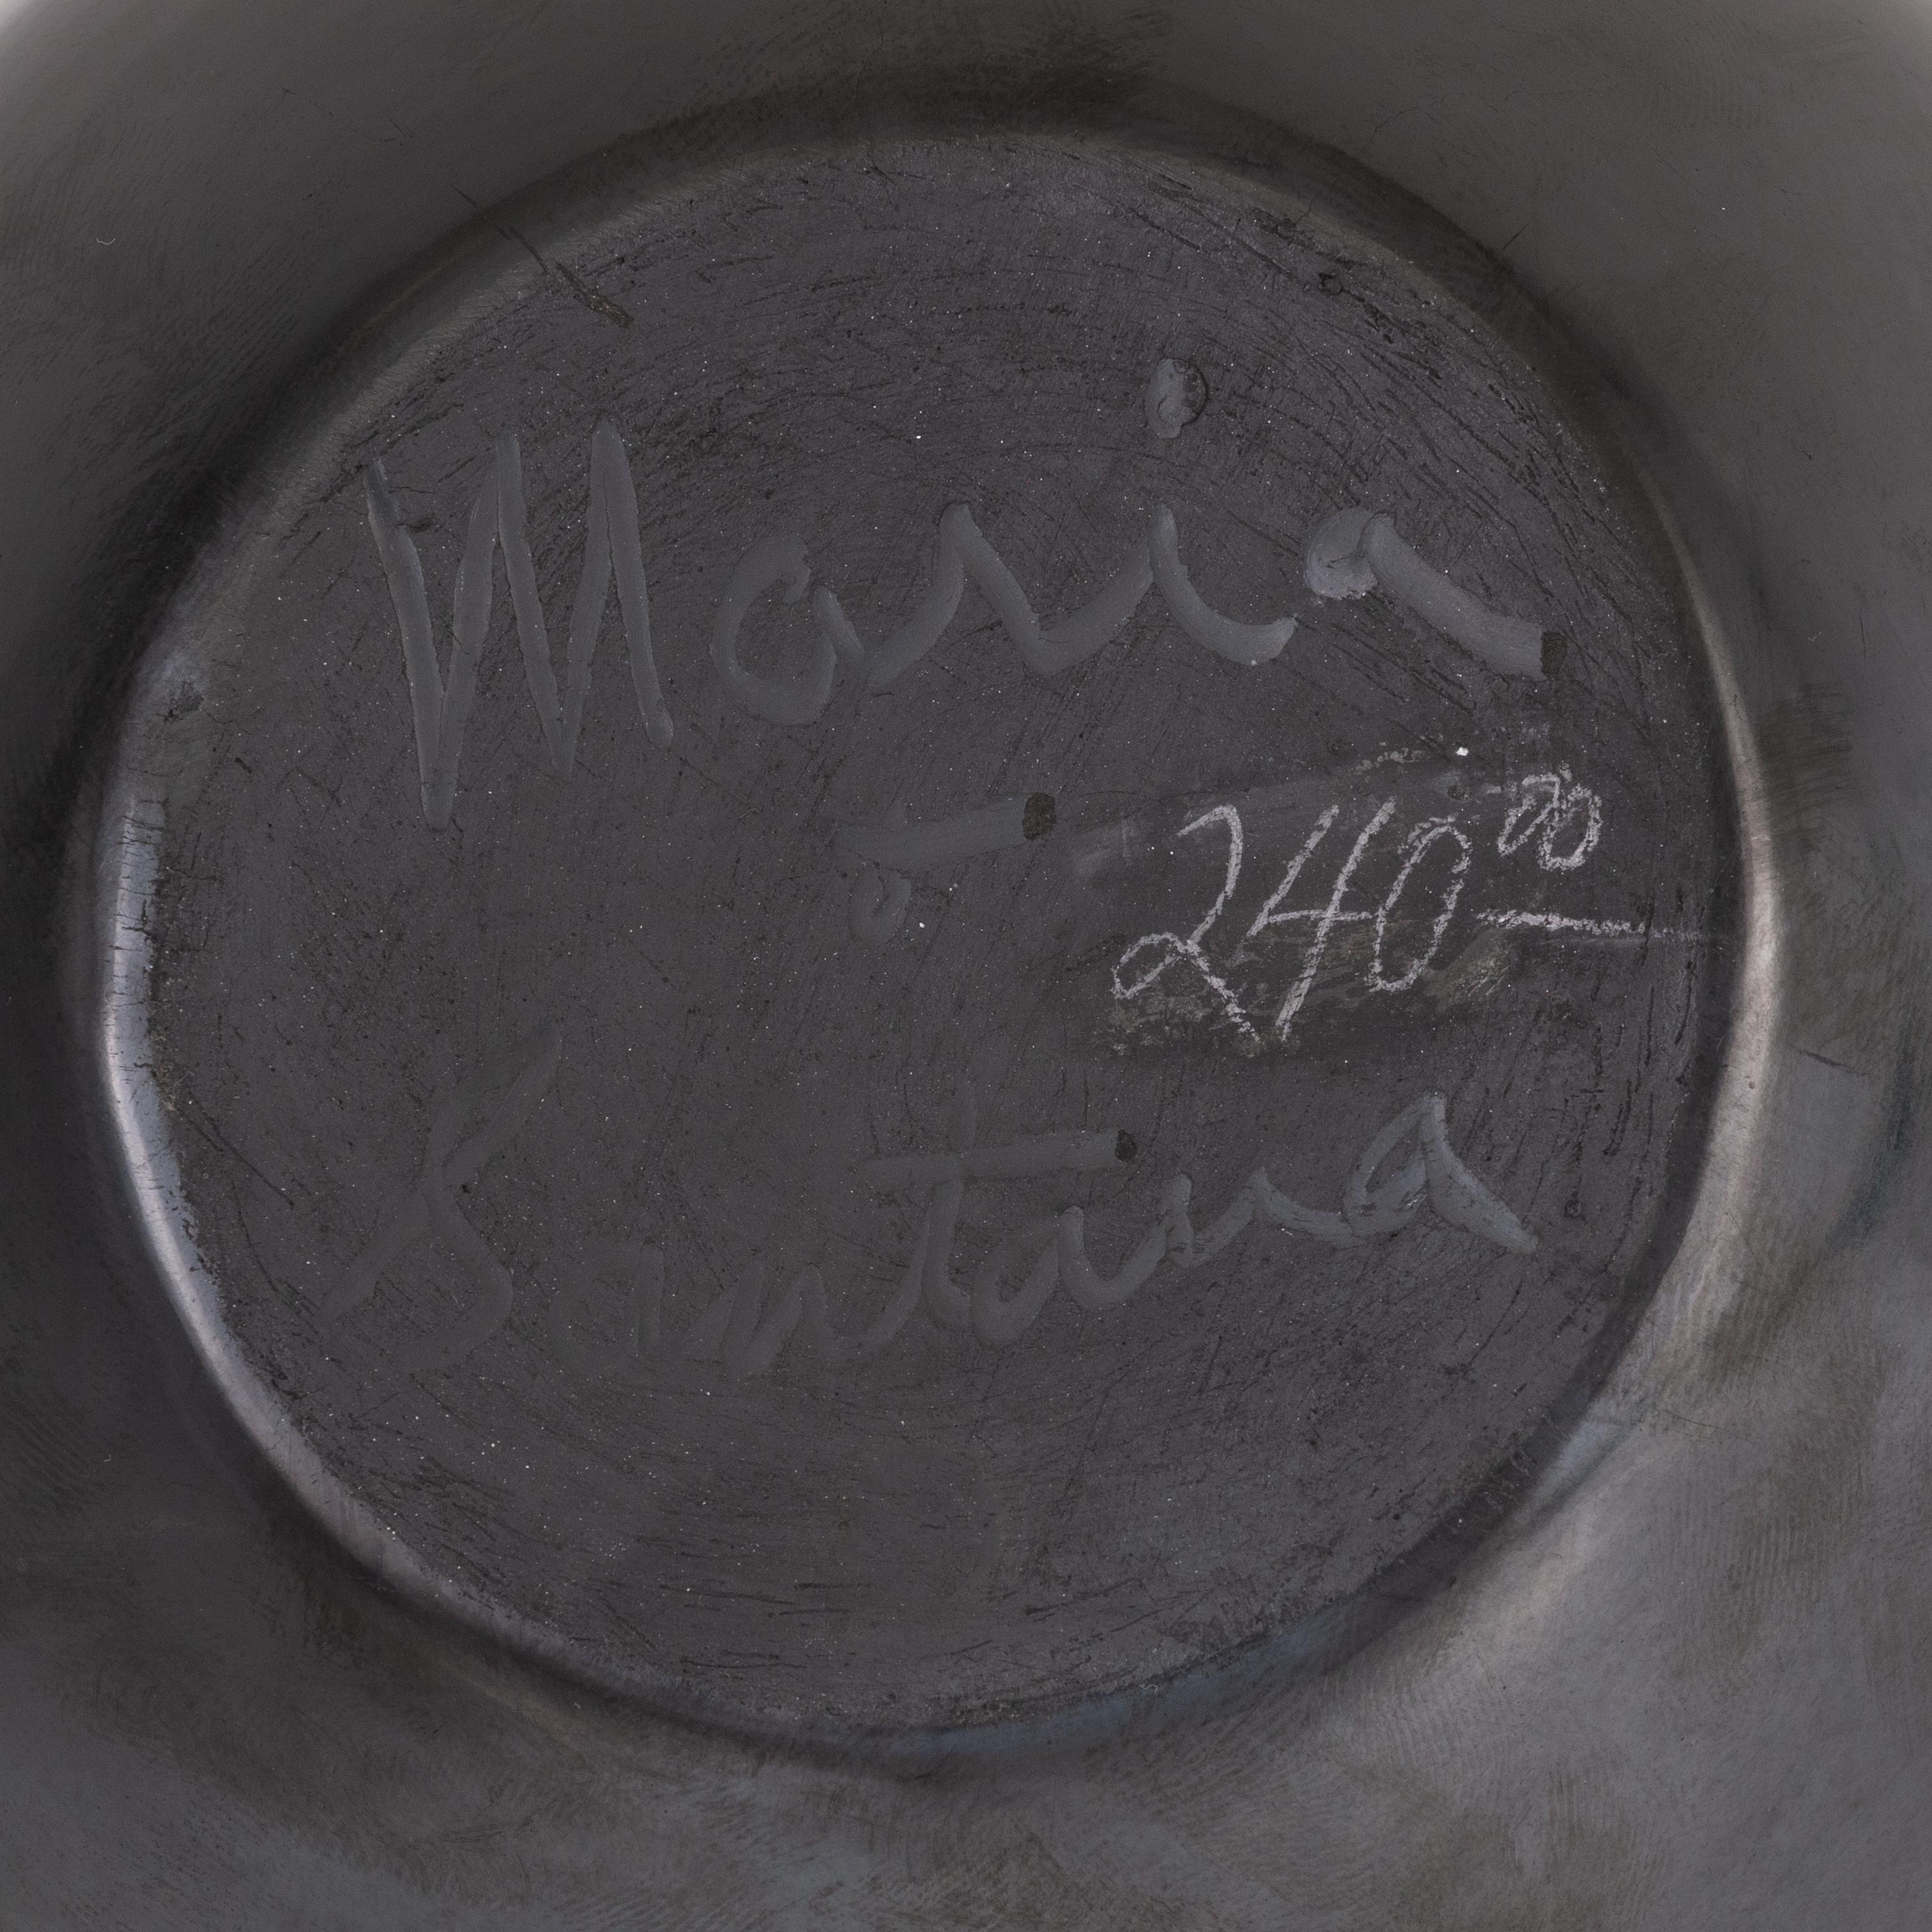 Maria and Santana Martinez Black Ware Pottery Bowl In Good Condition For Sale In Coeur d'Alene, ID